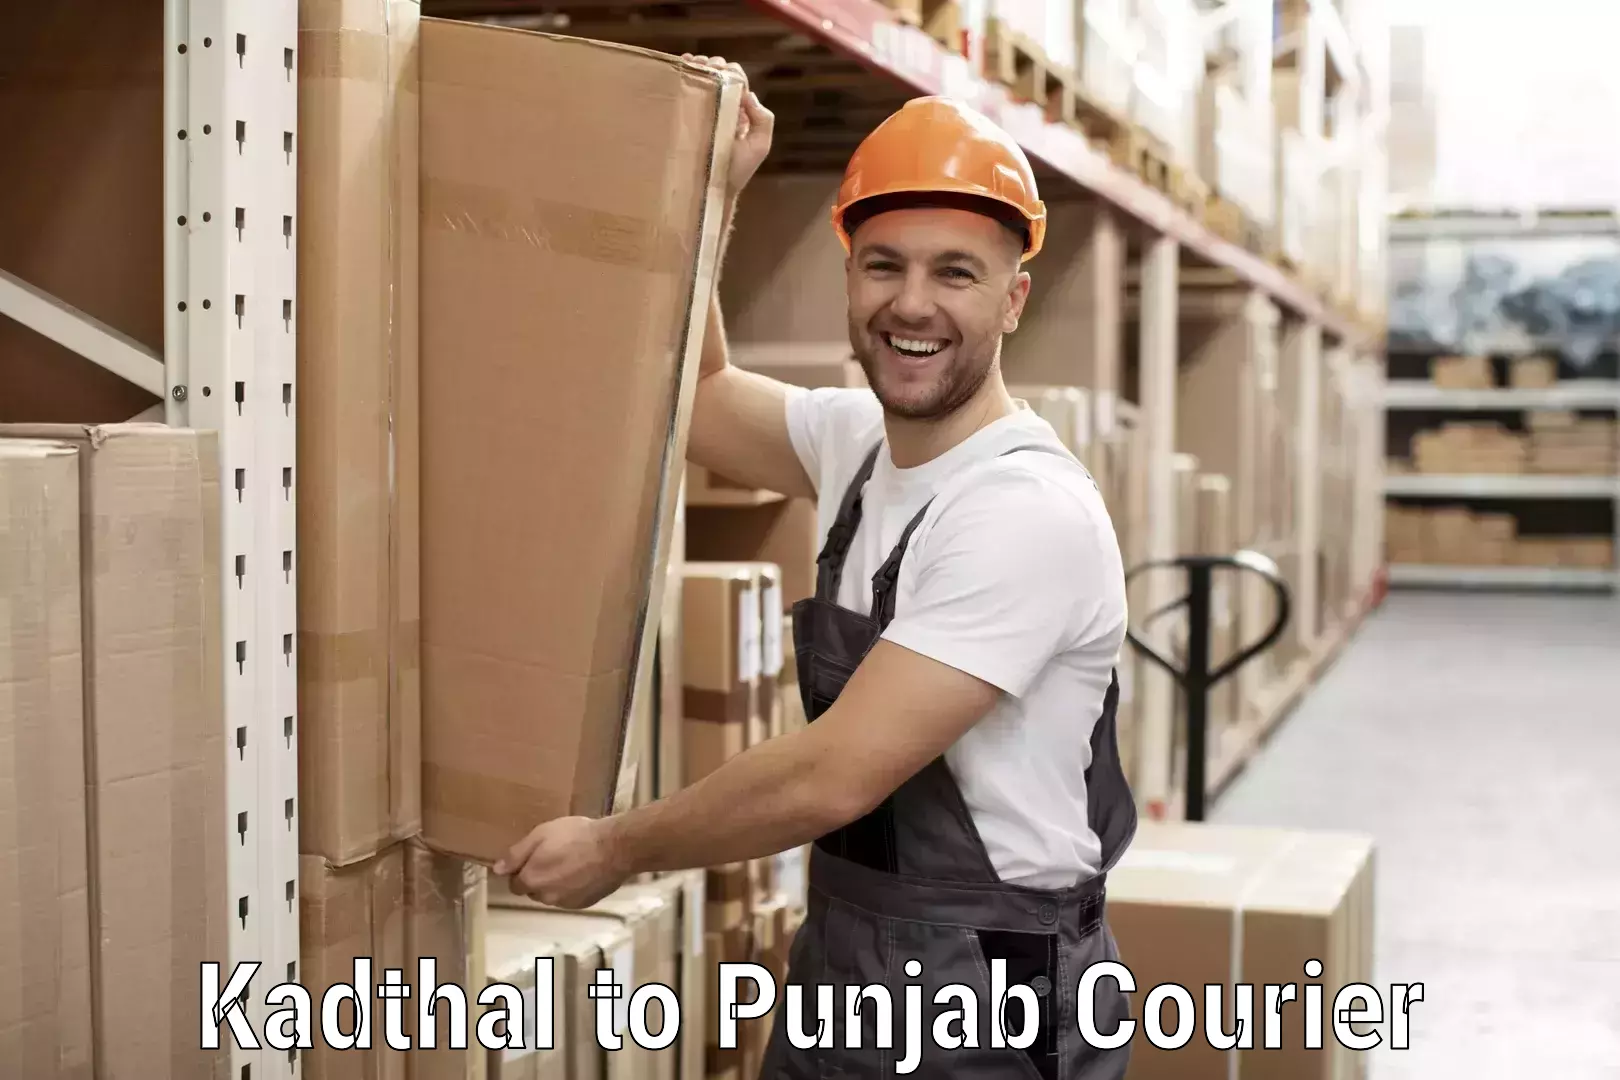 Courier service comparison Kadthal to Thapar Institute of Engineering and Technology Patiala